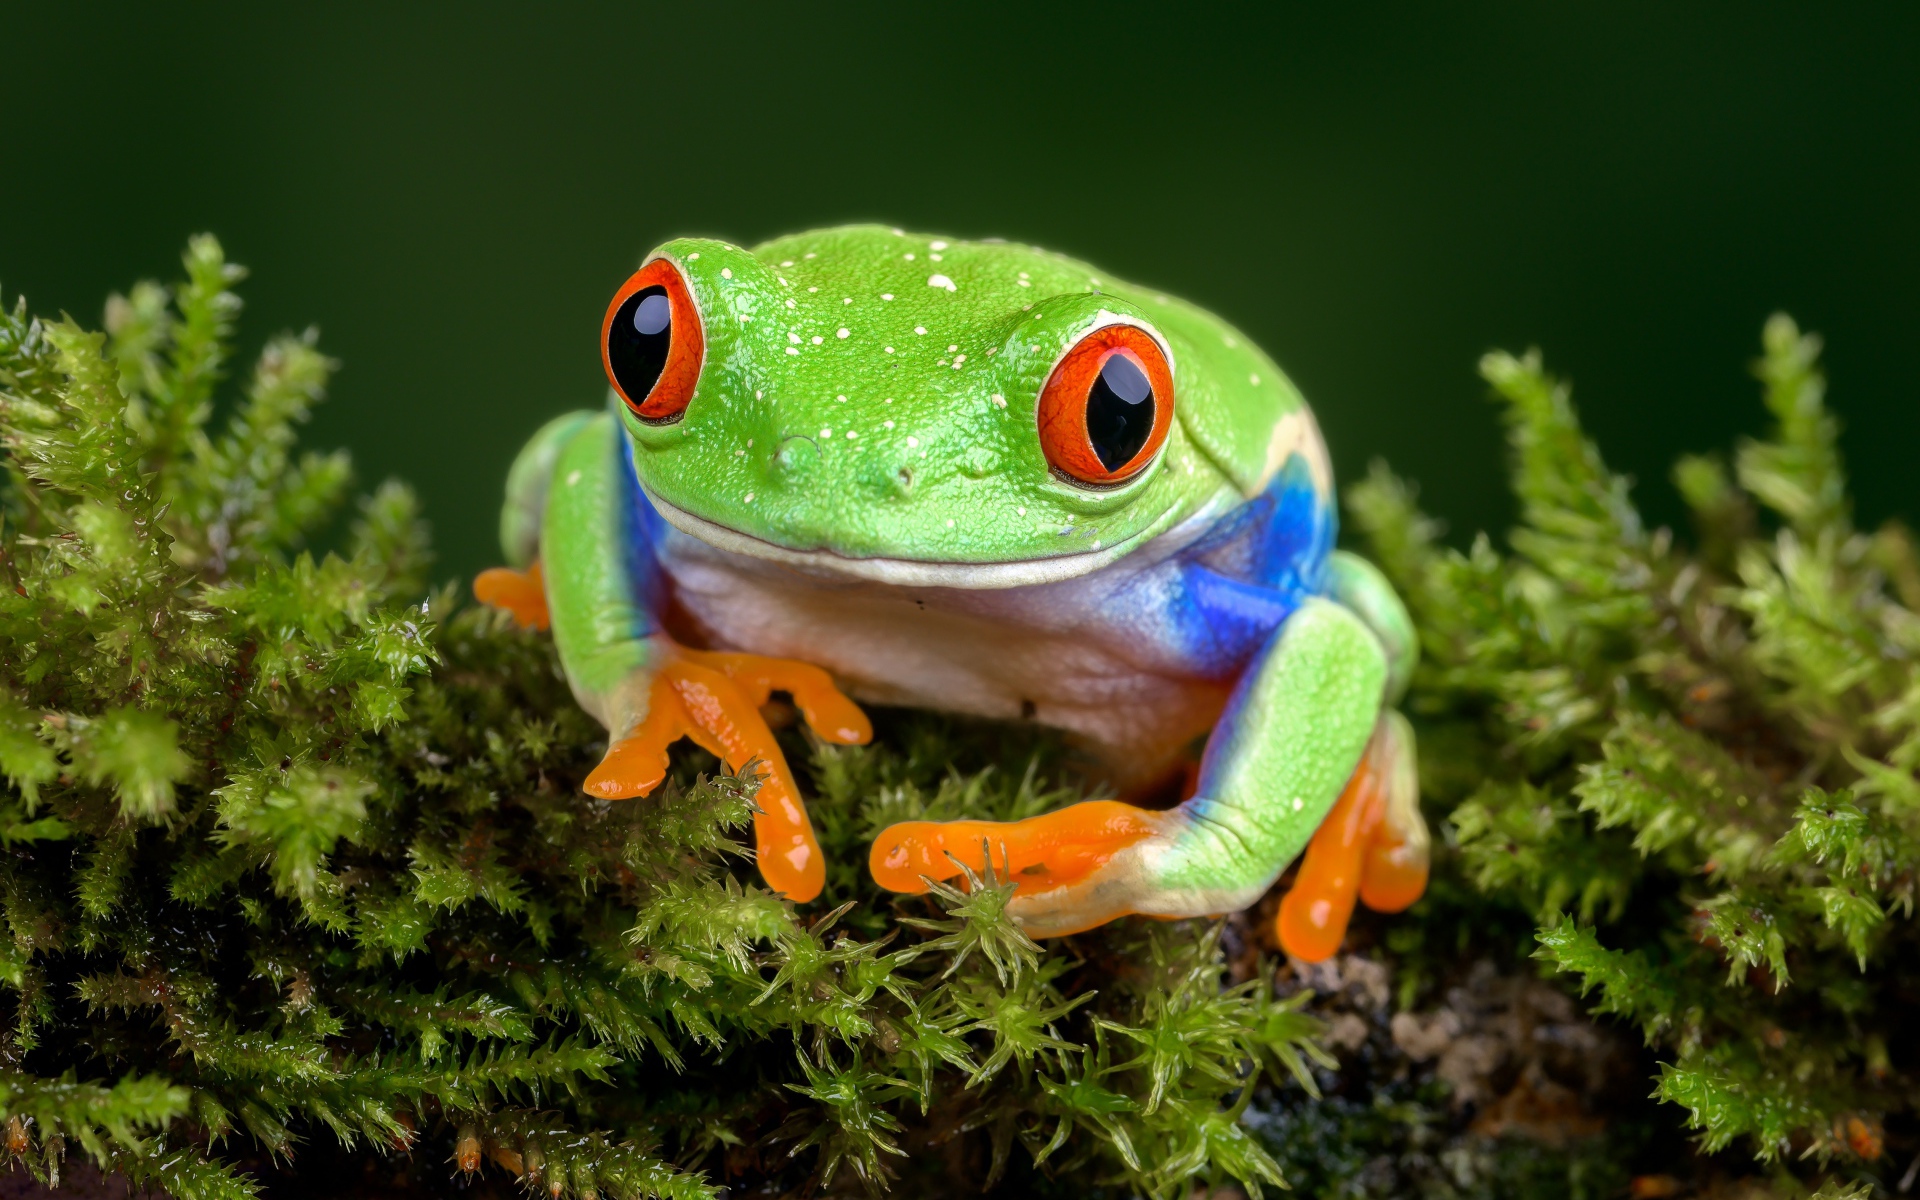 A large green frog with red eyes sits on a moss-covered branch